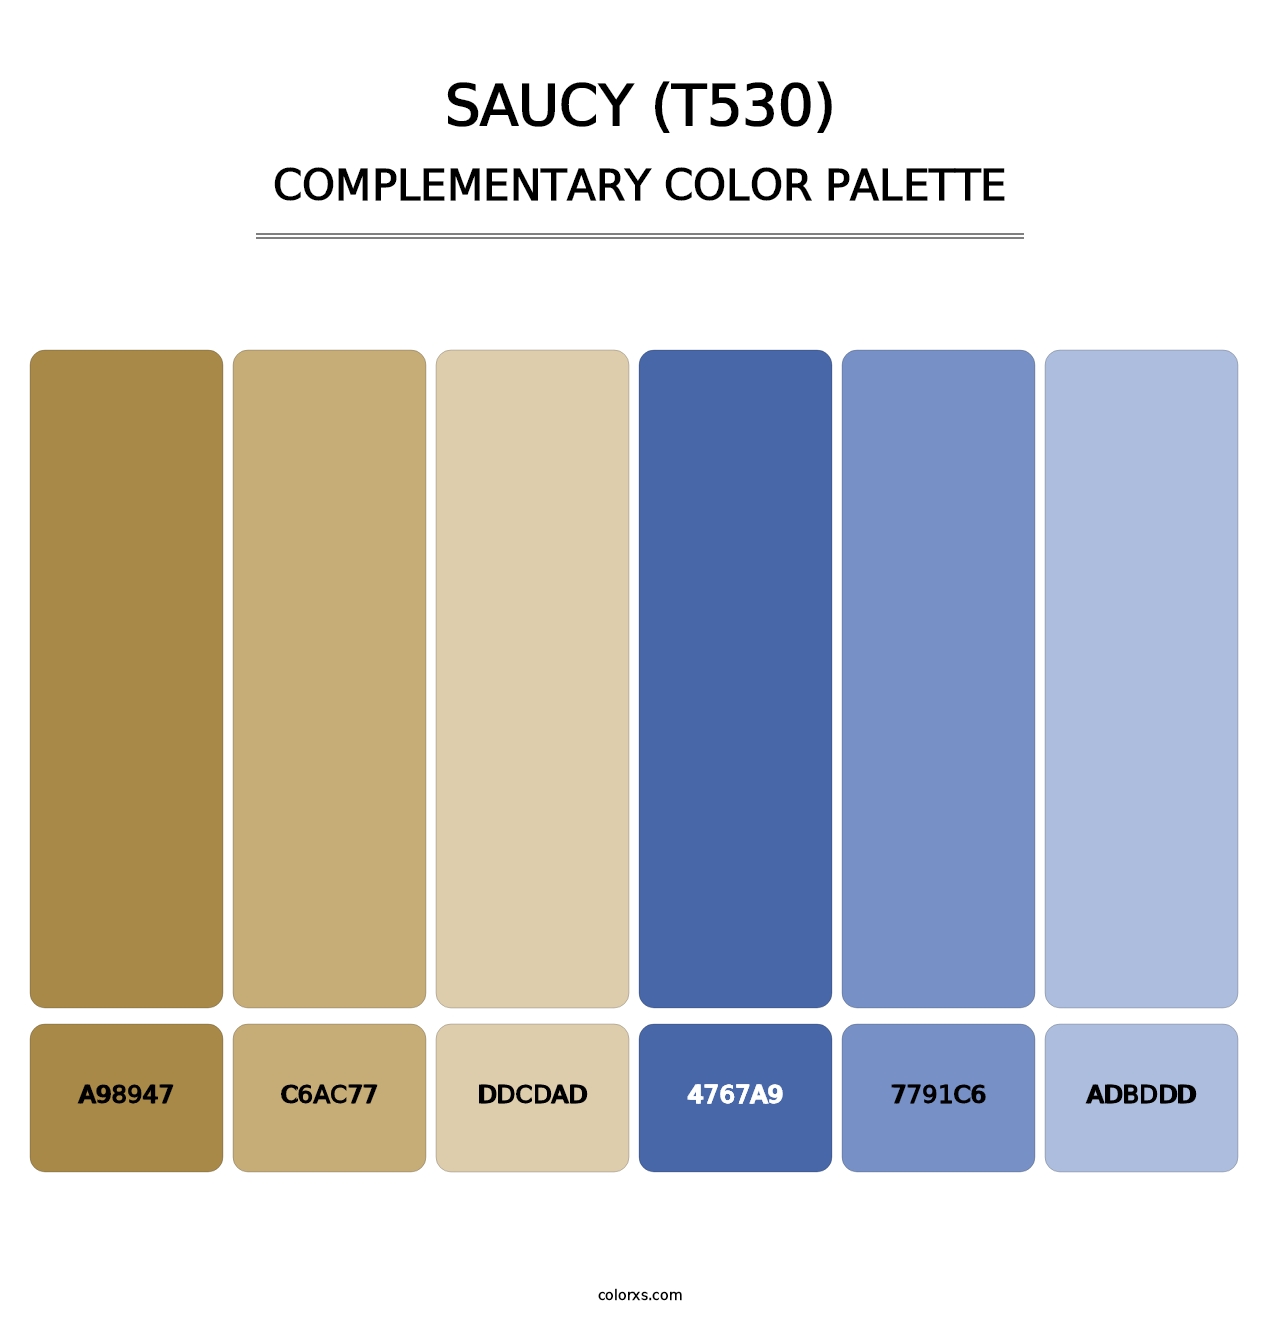 Saucy (T530) - Complementary Color Palette